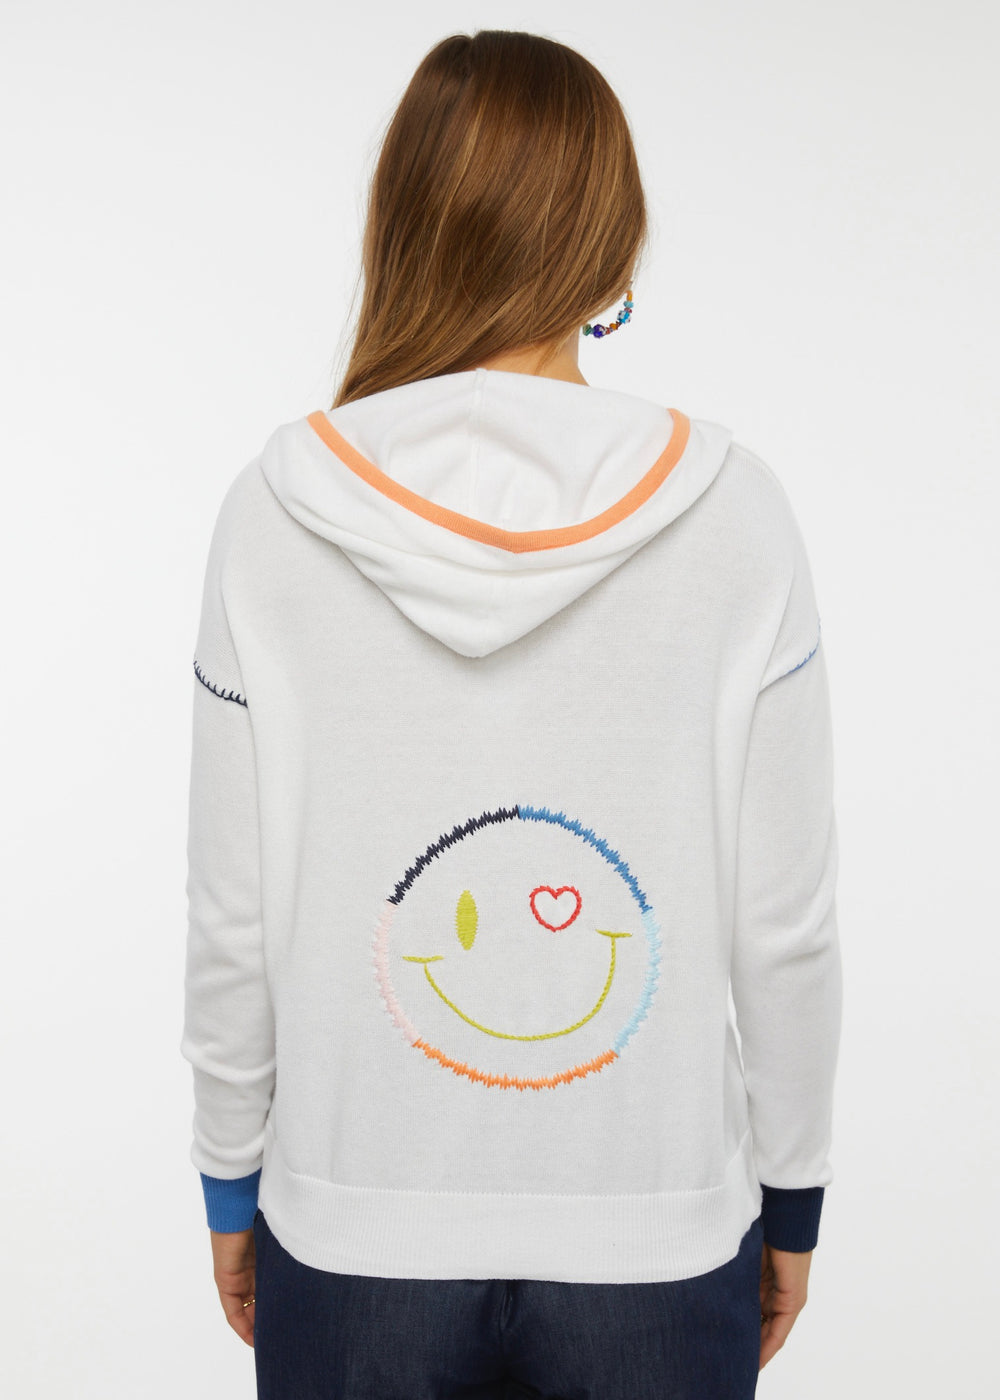 HAPPY FACE HOODIE-WHITE - Kingfisher Road - Online Boutique